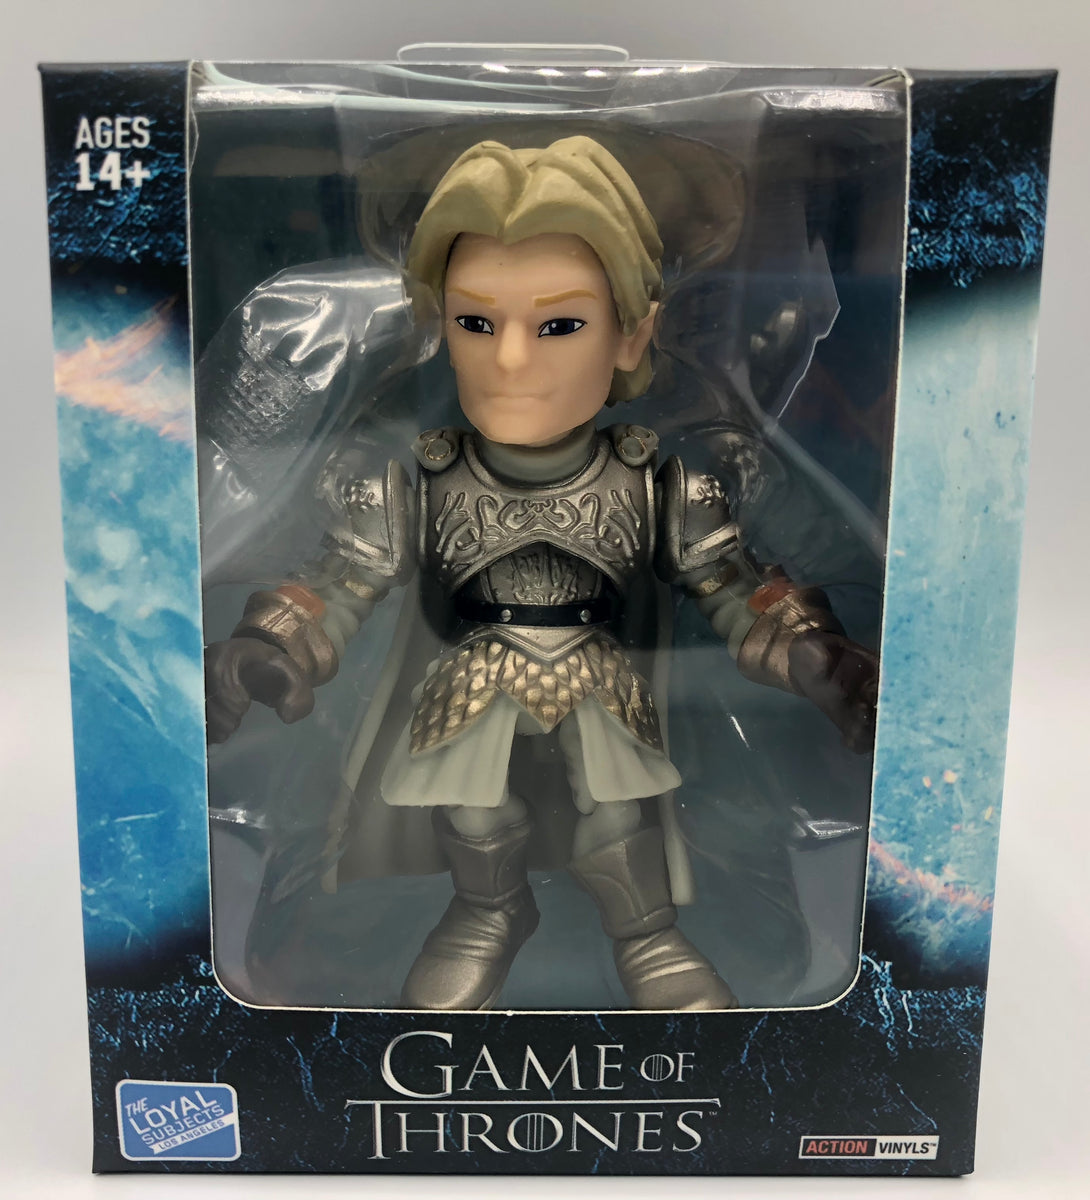 The Loyal Subjects GAME OF THRONES Action Vinyls Wave 1 JAIME LANNISTER Figure 